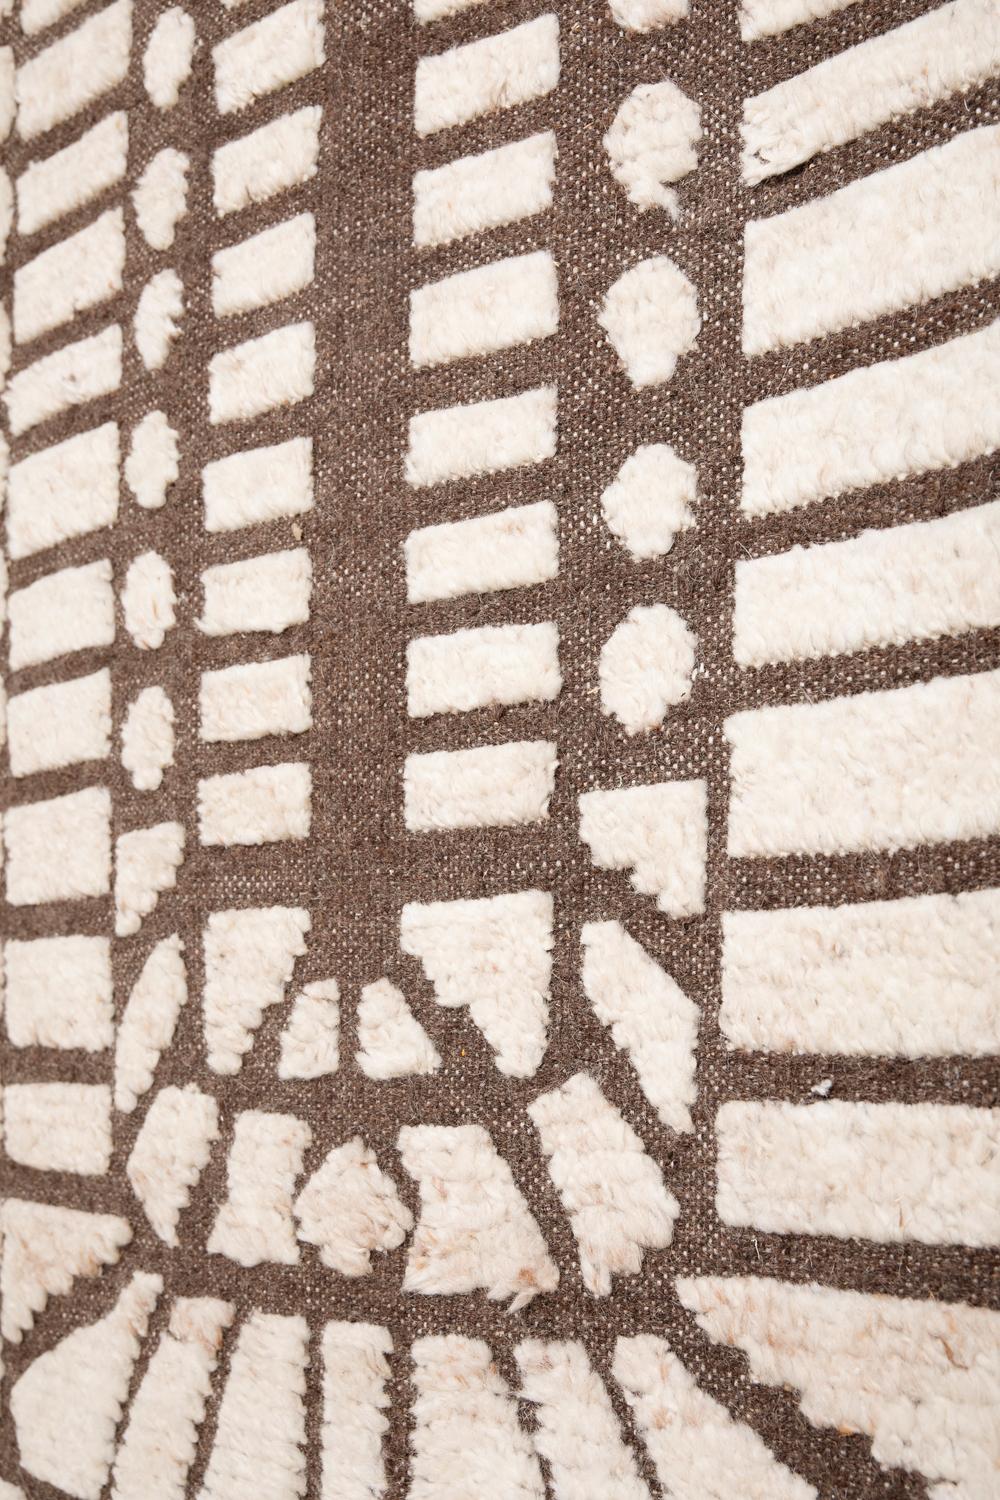 This rug has been ethically hand Knotted in the finest merino wool yarns by artisans in north of India. The brown part has a thickness of 6mm and the white part is 15mm.
Each rug is handknotted with irregular details to create beautiful